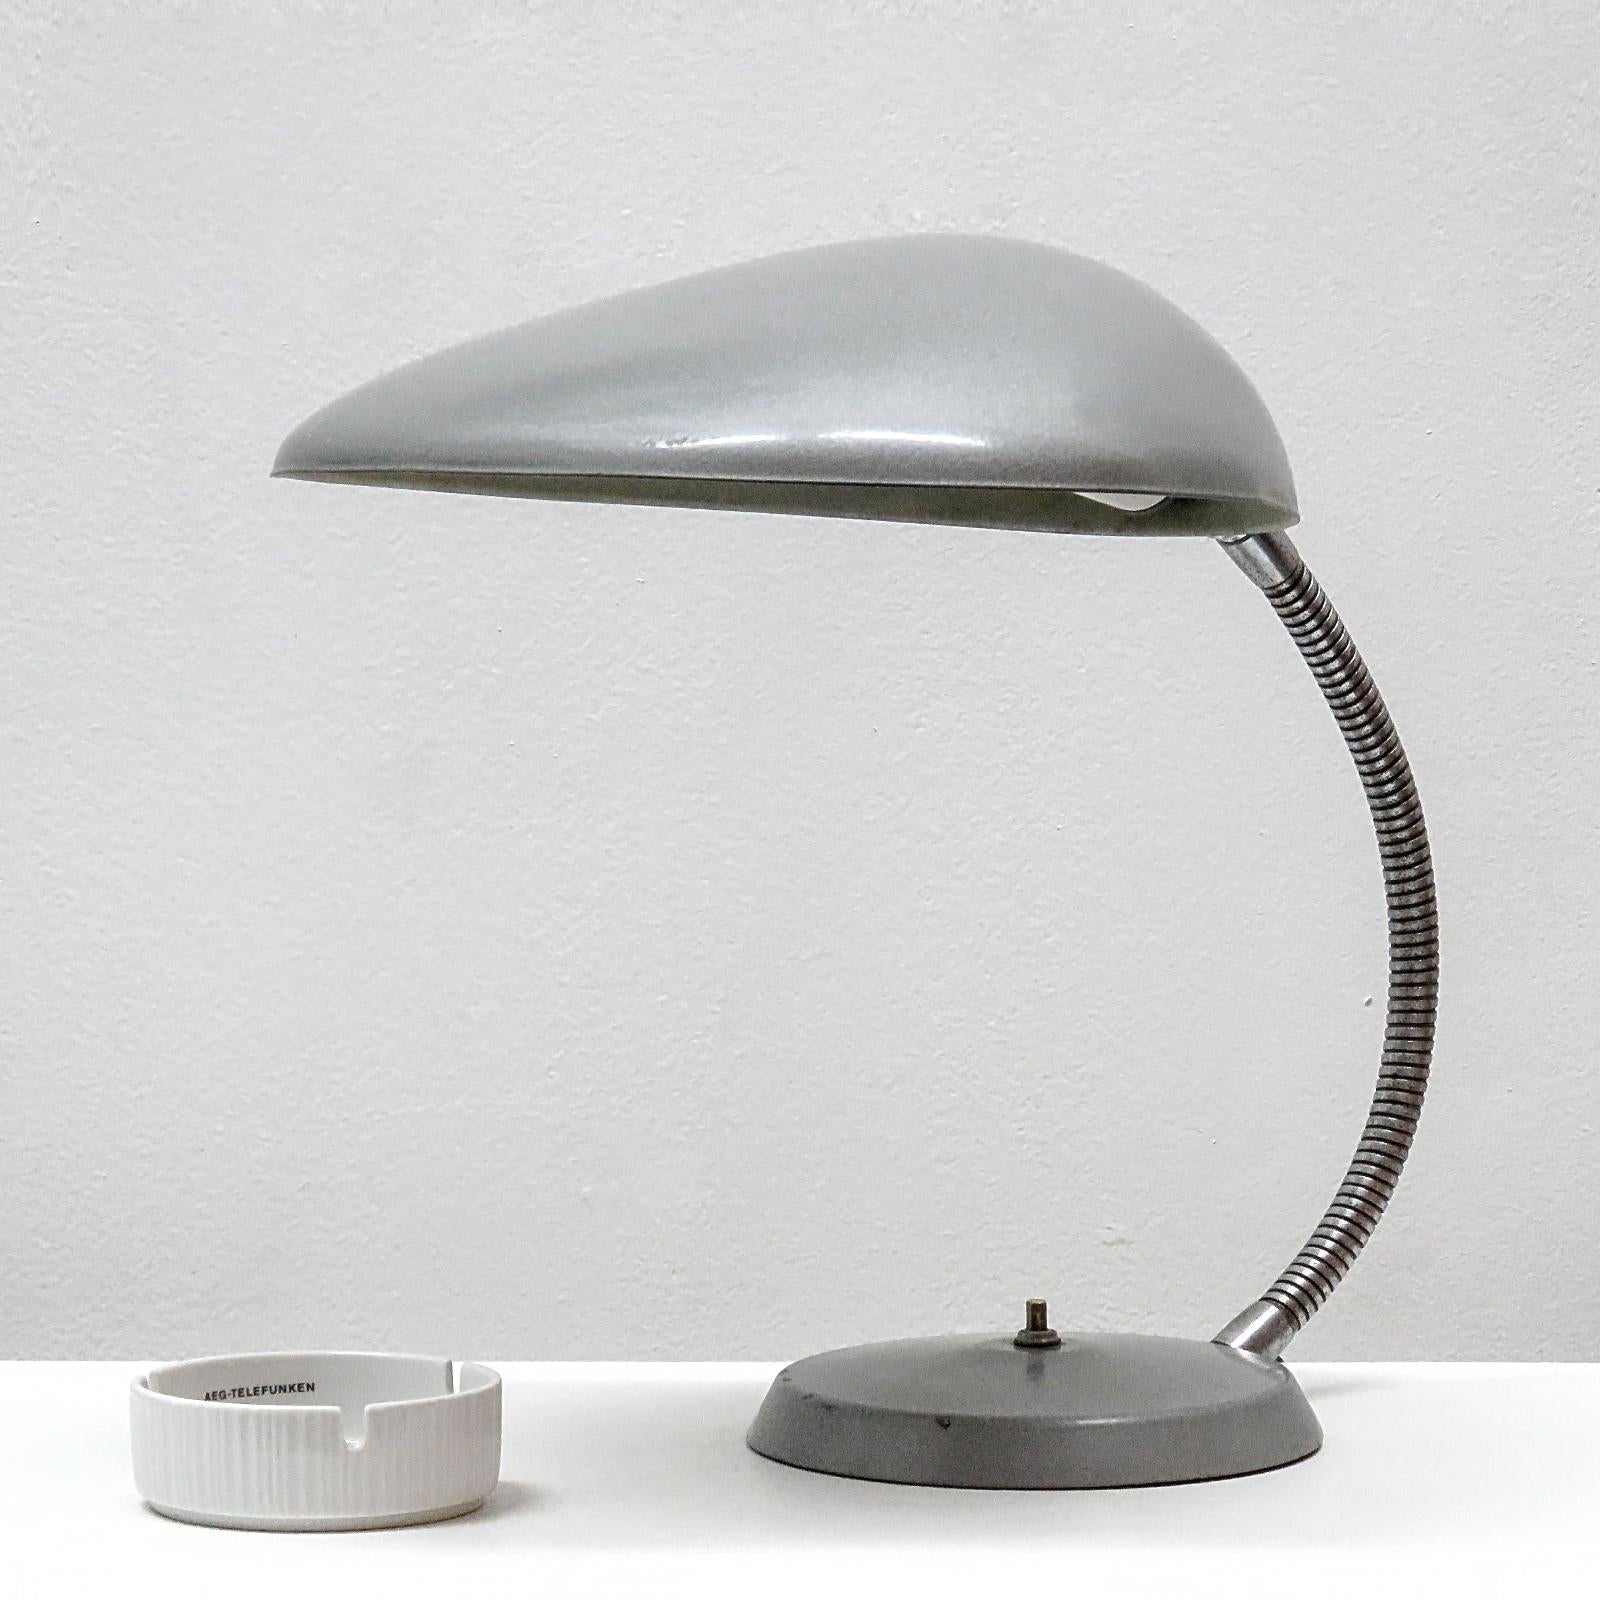 Iconic cobra lamp by Greta M. Grossman for Ralph O. Smith, circa 1950 in grey gun metal finish. Flexible arm, on/off switch at the base. One E26 socket, max. wattage 75w, wired for US standards, bulb provided as a onetime courtesy.